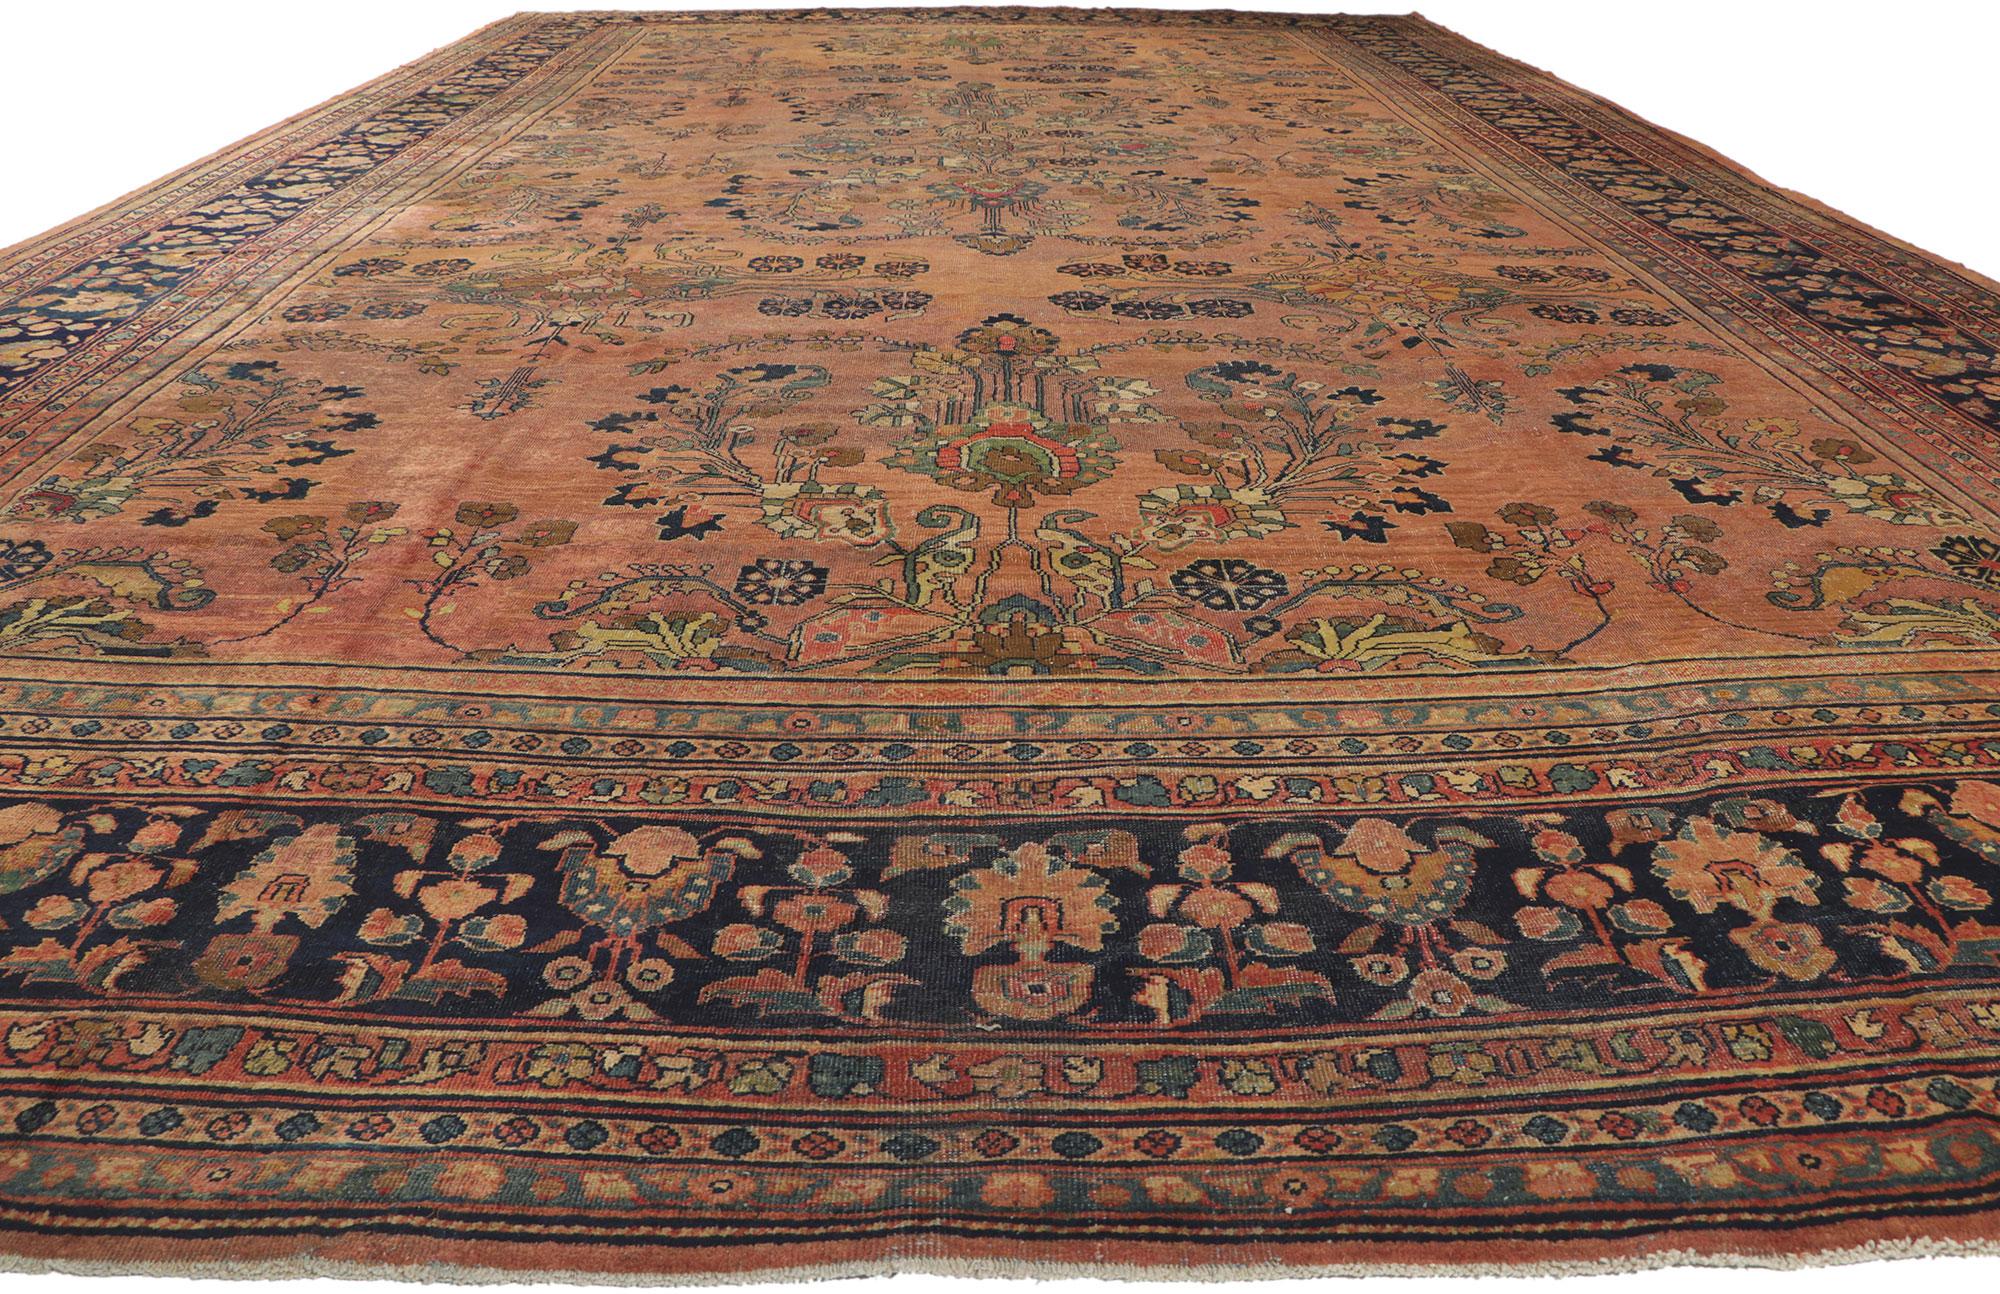 Malayer Tapis Persan Antique Mahal Hotel Taille Lobby en vente